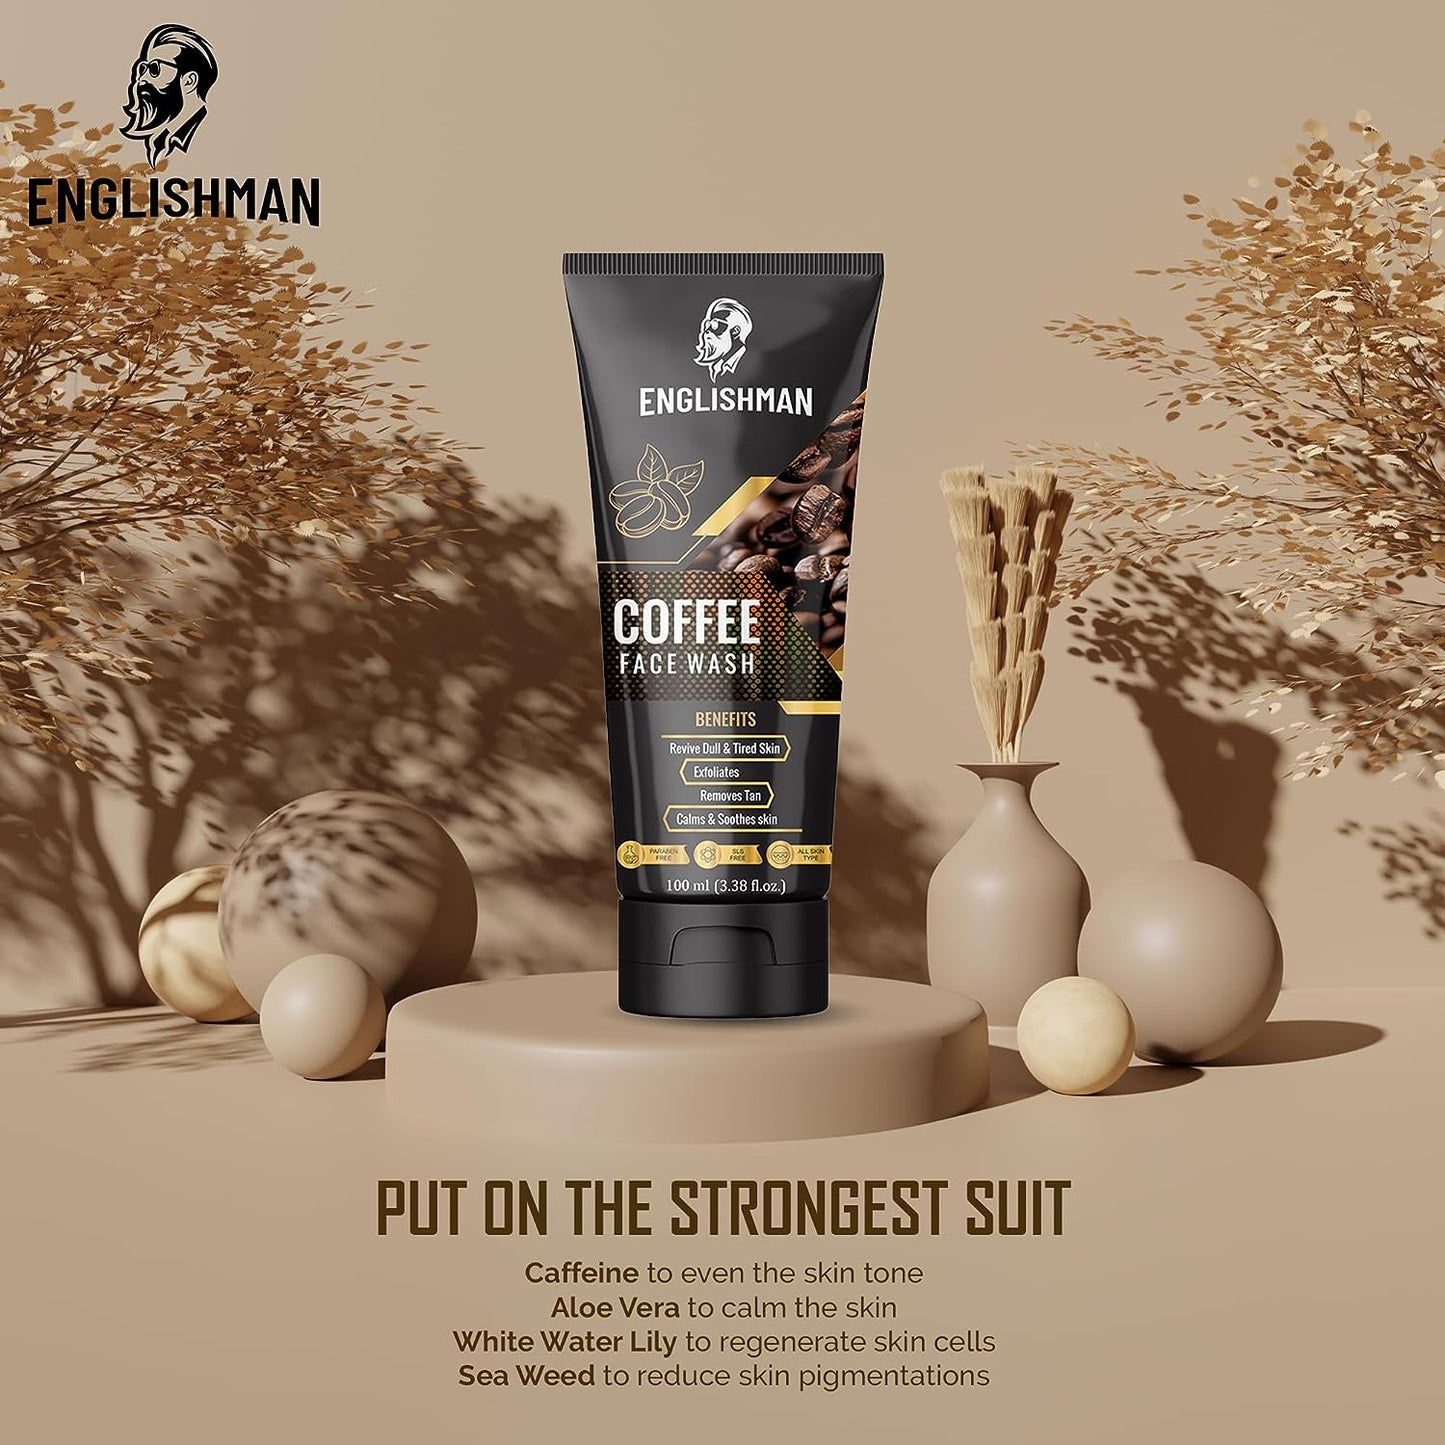 ENGLISHMAN Coffee Face Wash for Men -Revive Dull & Tired Skin, Exfoliates, Removes Tan,Calms & Soothes Skin (All Skin Type) - 100ml